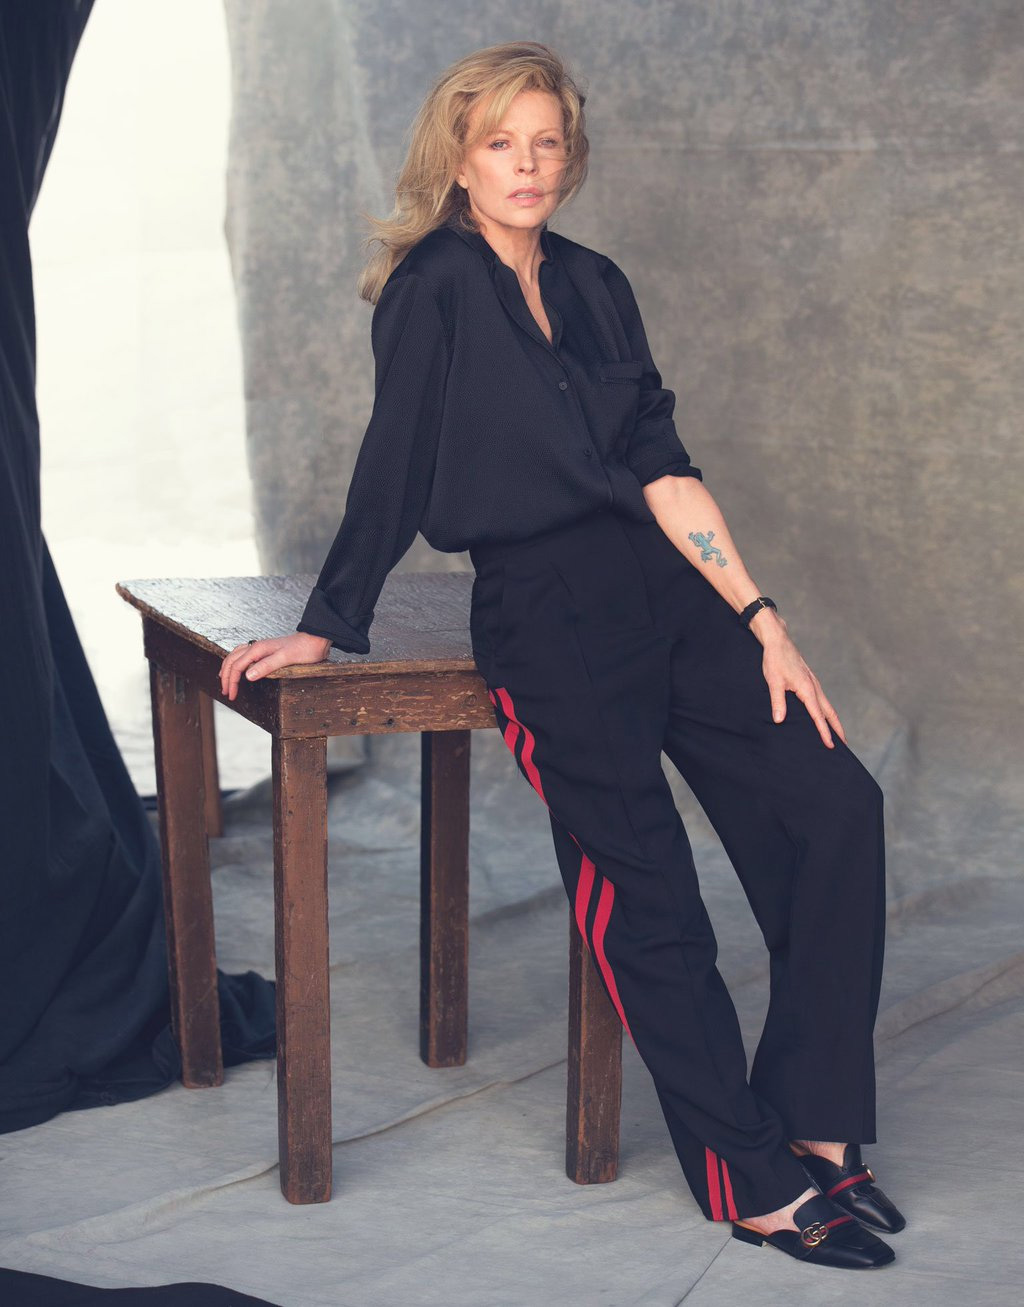 Kim Basinger by David Bellemere. Shirt by Barbara Casasola, pants by Alexander McQueens, shoes by Gucci, watch by Larsson & Jennings